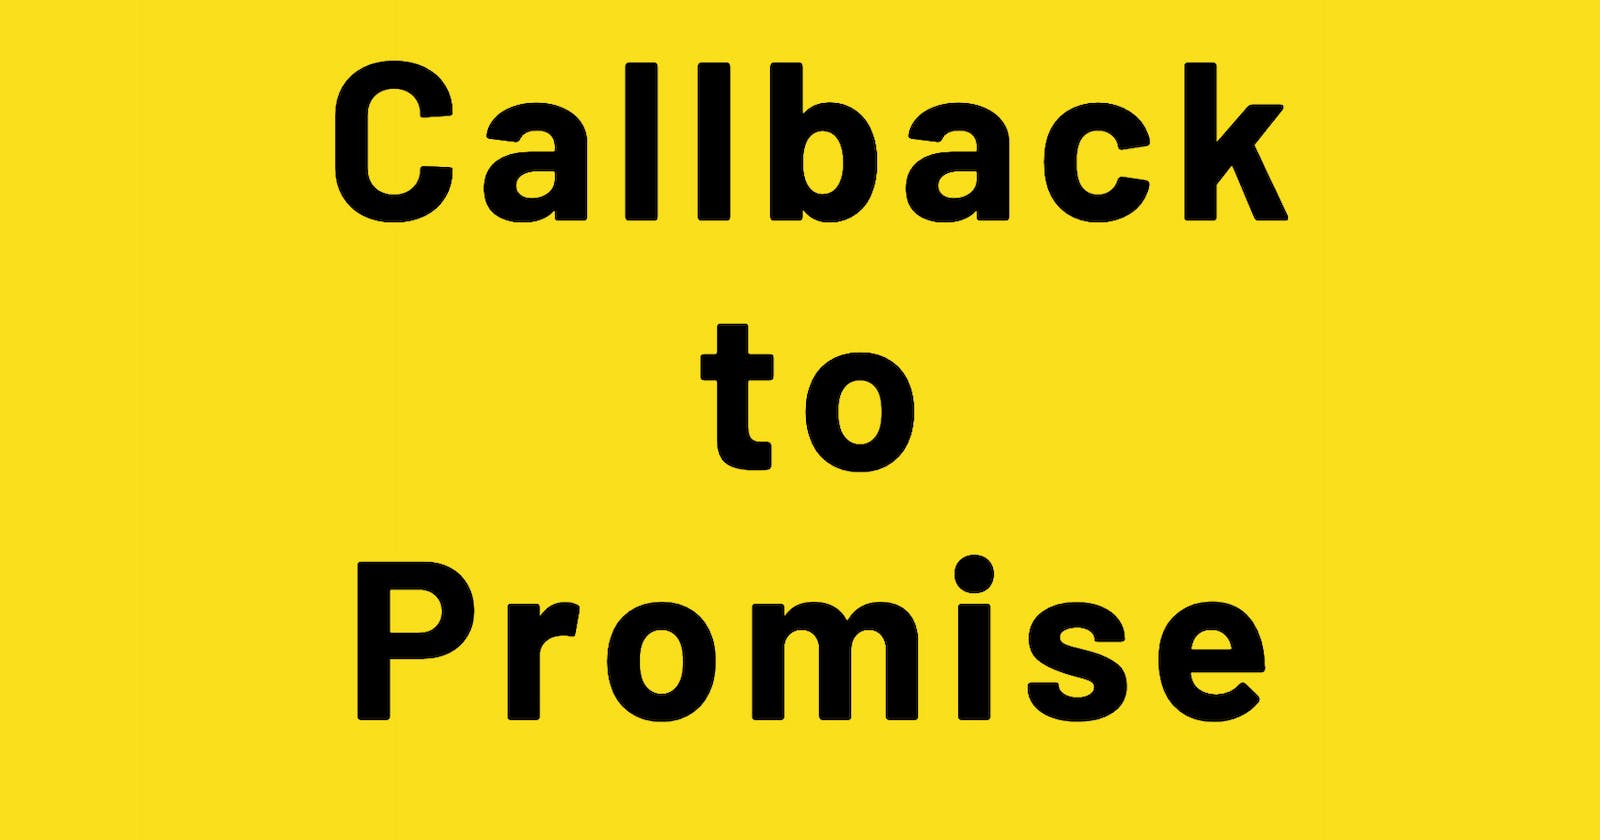 Javascript: No More callbacks use promisify to convert callback to promise